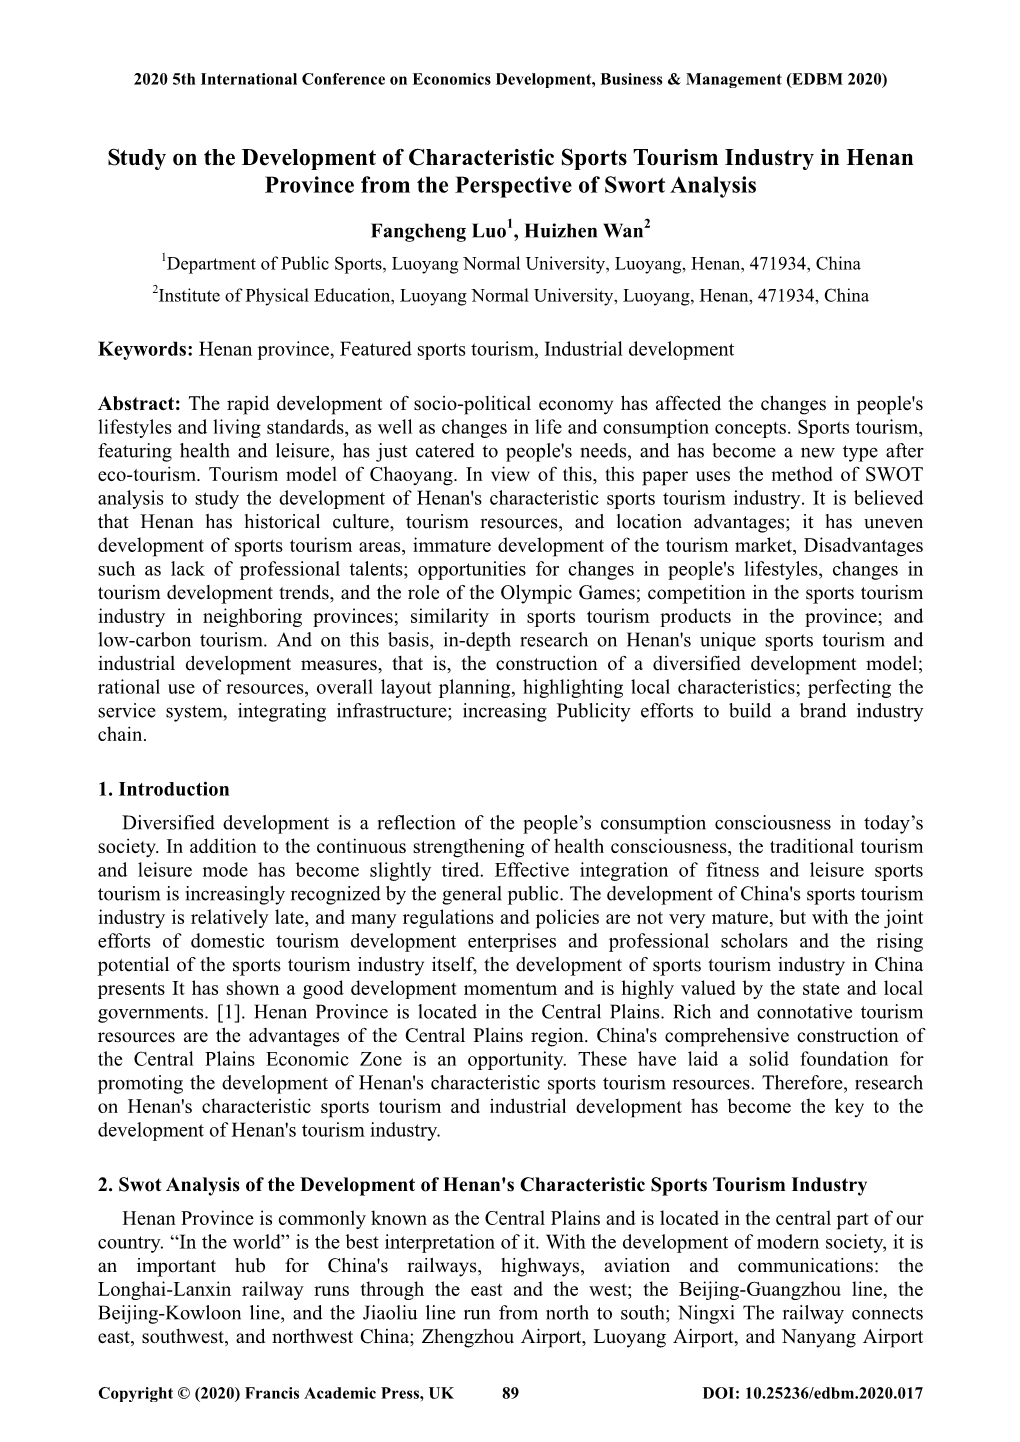 Study on the Development of Characteristic Sports Tourism Industry in Henan Province from the Perspective of Swort Analysis